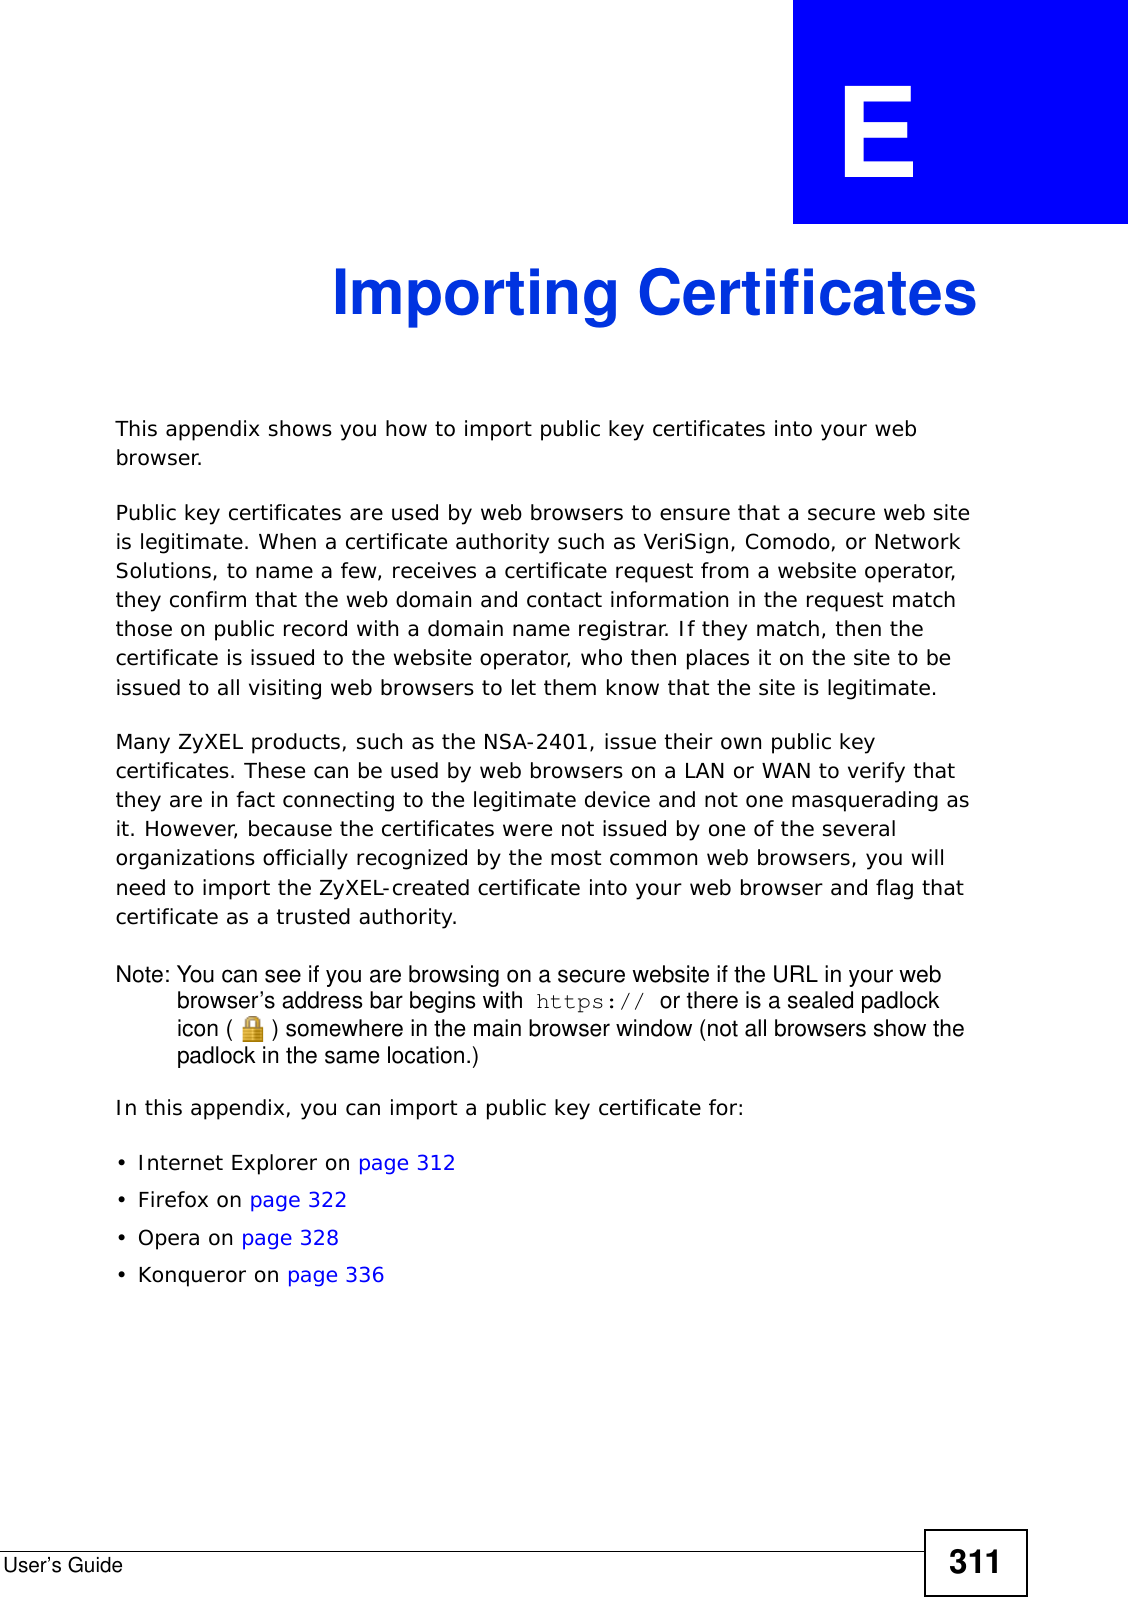 User’s Guide 311APPENDIX  E Importing CertificatesThis appendix shows you how to import public key certificates into your web browser. Public key certificates are used by web browsers to ensure that a secure web site is legitimate. When a certificate authority such as VeriSign, Comodo, or Network Solutions, to name a few, receives a certificate request from a website operator, they confirm that the web domain and contact information in the request match those on public record with a domain name registrar. If they match, then the certificate is issued to the website operator, who then places it on the site to be issued to all visiting web browsers to let them know that the site is legitimate.Many ZyXEL products, such as the NSA-2401, issue their own public key certificates. These can be used by web browsers on a LAN or WAN to verify that they are in fact connecting to the legitimate device and not one masquerading as it. However, because the certificates were not issued by one of the several organizations officially recognized by the most common web browsers, you will need to import the ZyXEL-created certificate into your web browser and flag that certificate as a trusted authority.Note: You can see if you are browsing on a secure website if the URL in your web browser’s address bar begins with  https:// or there is a sealed padlock icon ( ) somewhere in the main browser window (not all browsers show the padlock in the same location.)In this appendix, you can import a public key certificate for:• Internet Explorer on page 312•Firefox on page 322•Opera on page 328• Konqueror on page 336